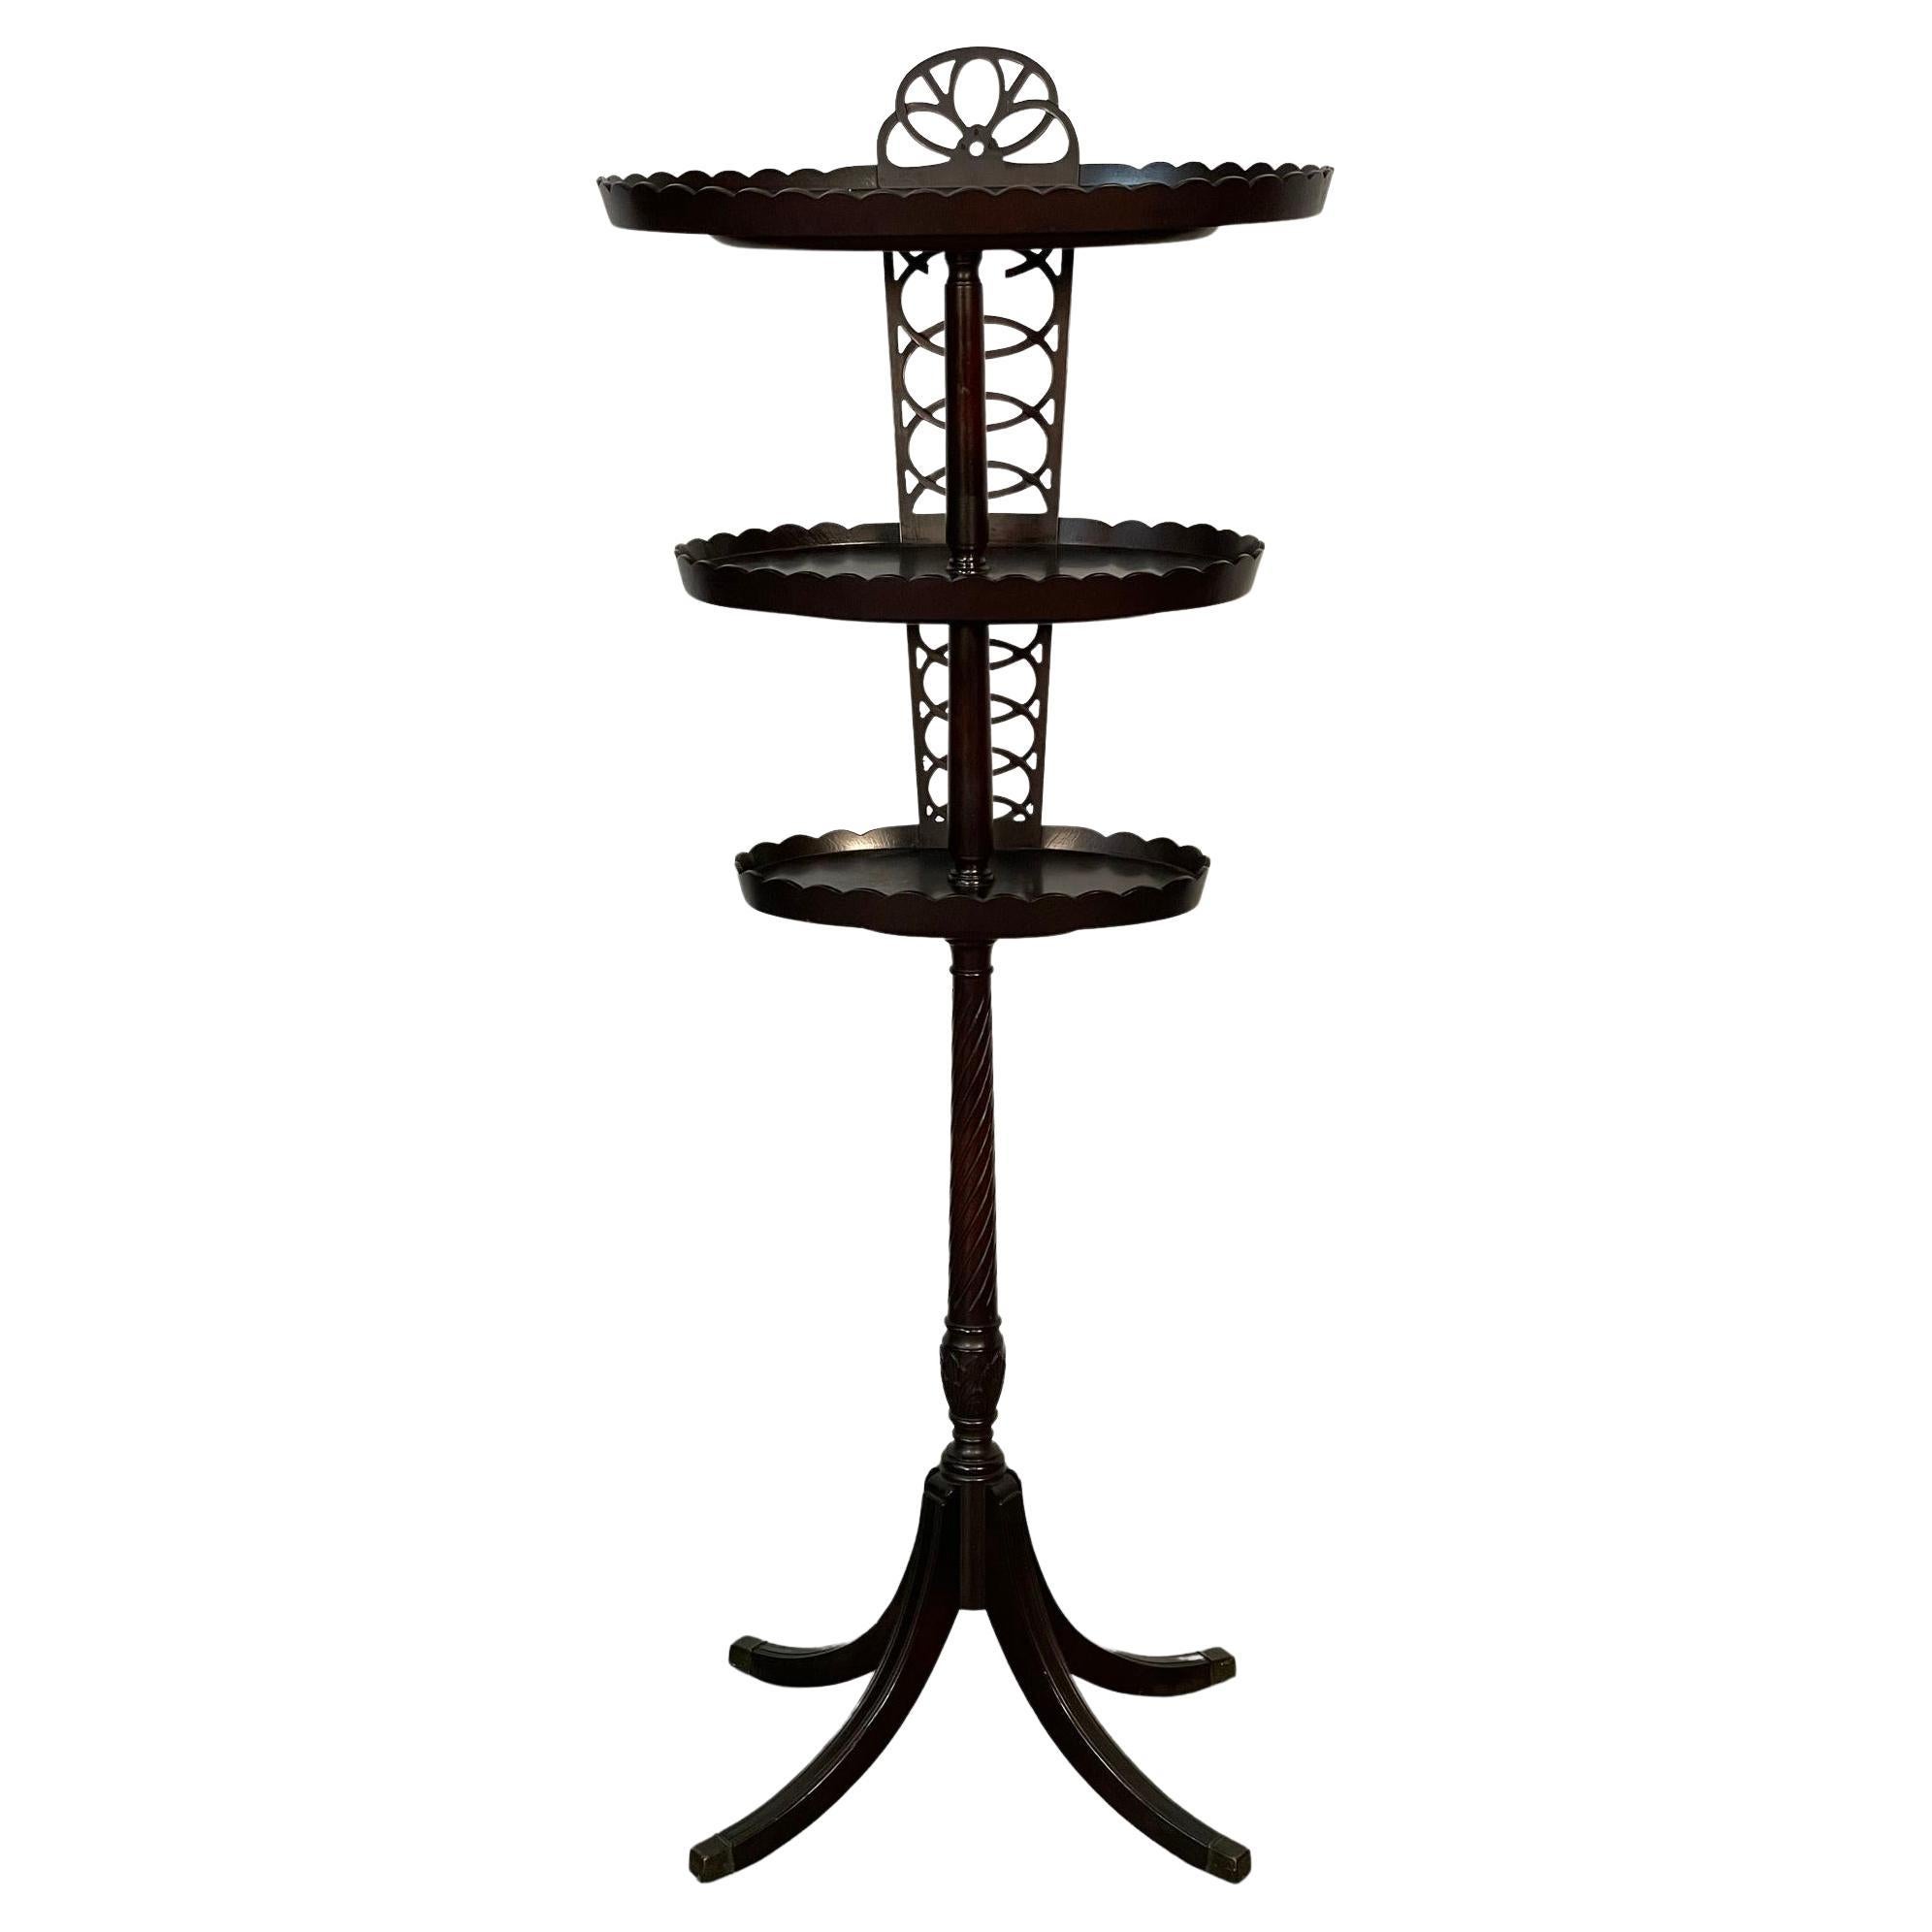 Georgian Style Mahogany Tri-Shelf Desert Stand / Dining Room Accent Décor For Sale